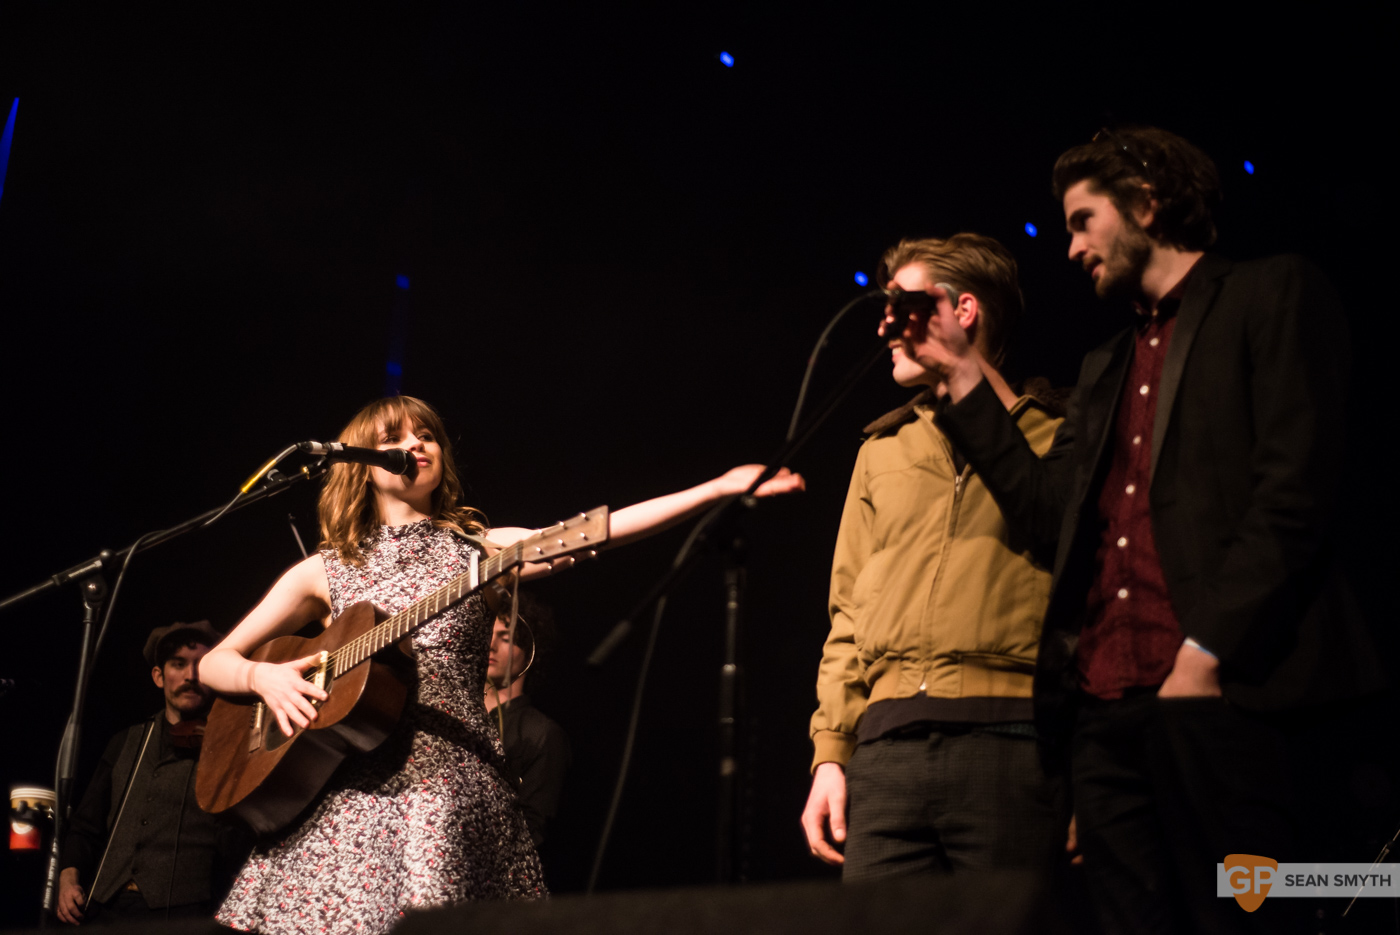 Gabrielle Aplin at the Olympia Theatre by Sean Smyth (20-2-15) (15 of 28)